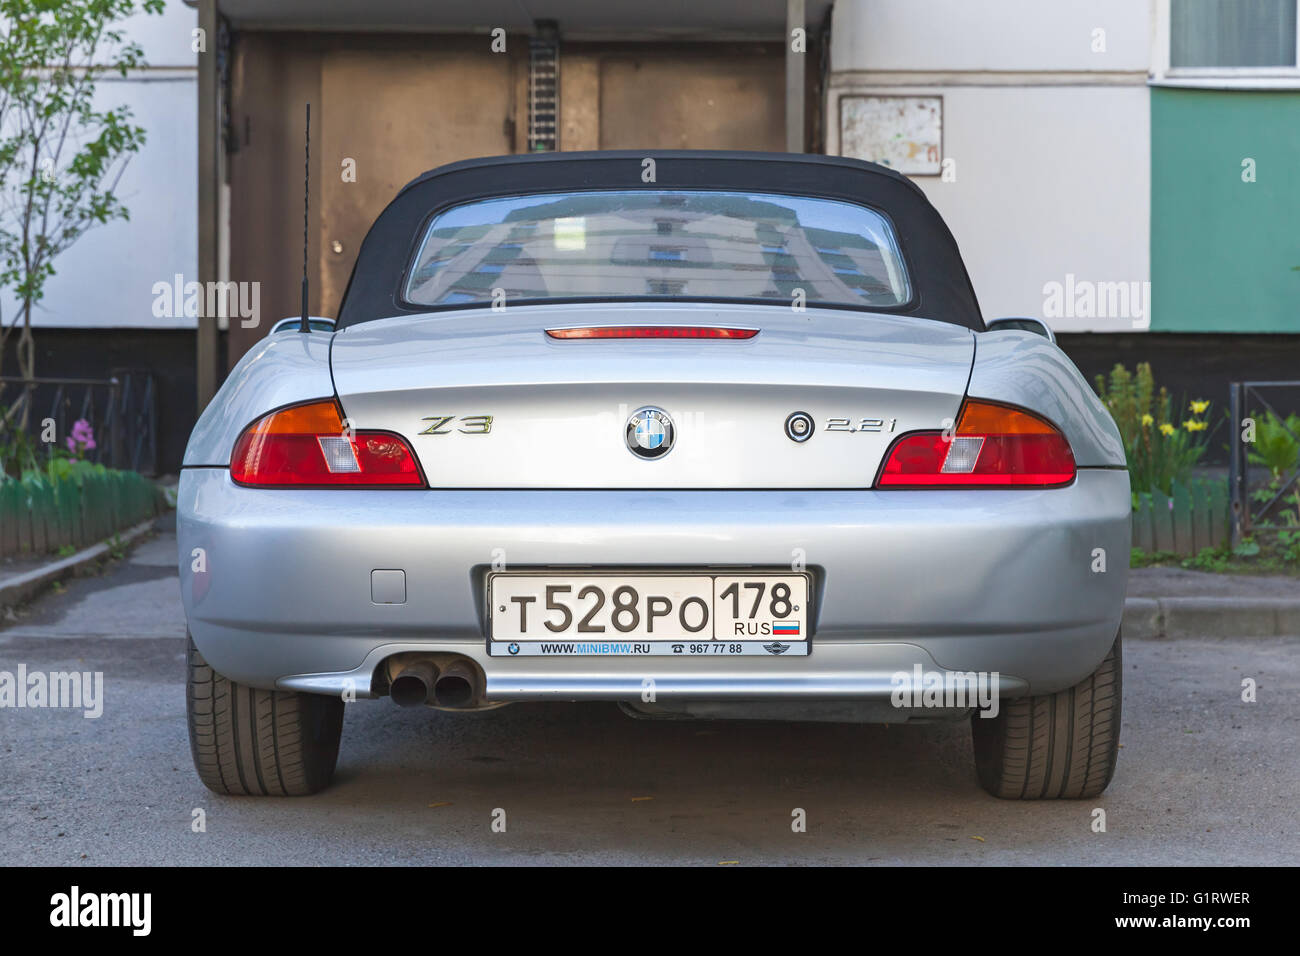 Saint-Petersburg, Russia - May 12, 2016: Silver gray BMW Z3 car stands parked on the roadside, rear view Stock Photo